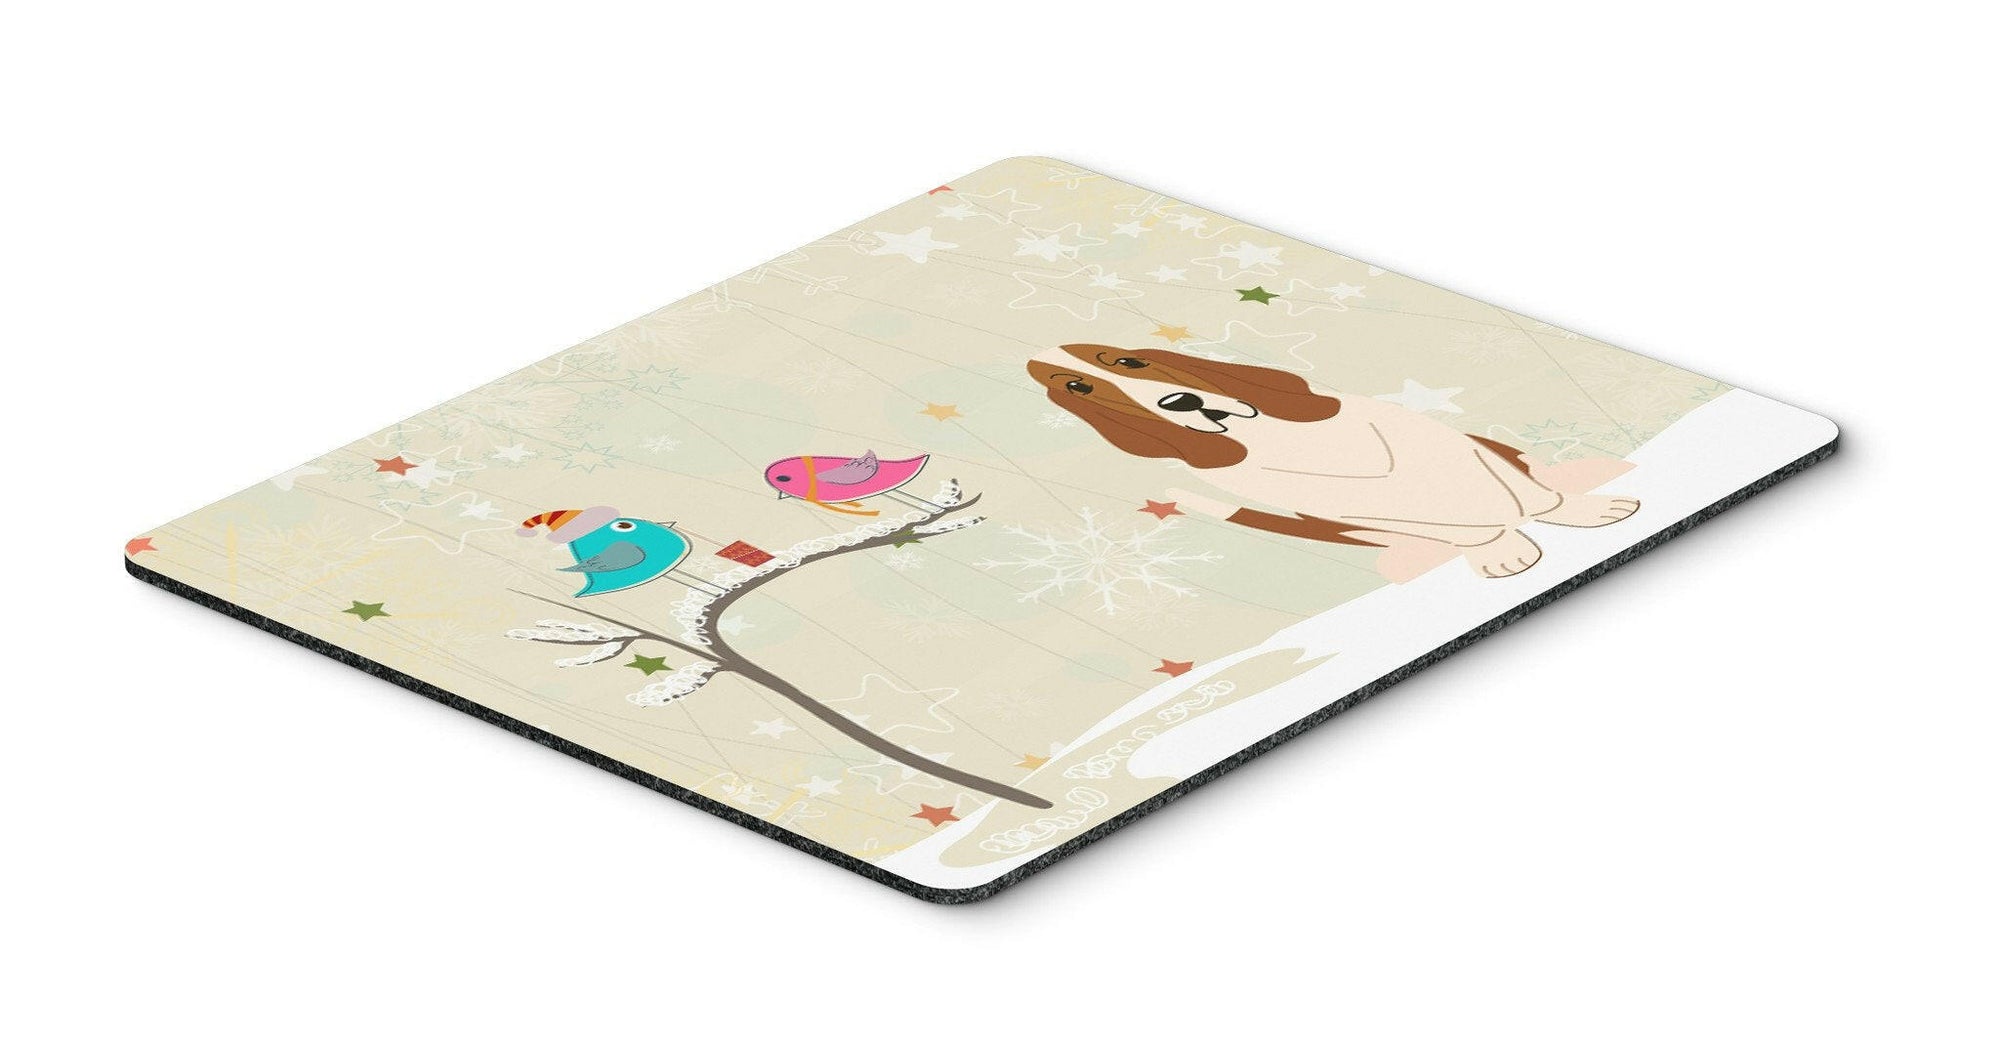 Christmas Presents between Friends Basset Hound Mouse Pad, Hot Pad or Trivet BB2493MP by Caroline's Treasures